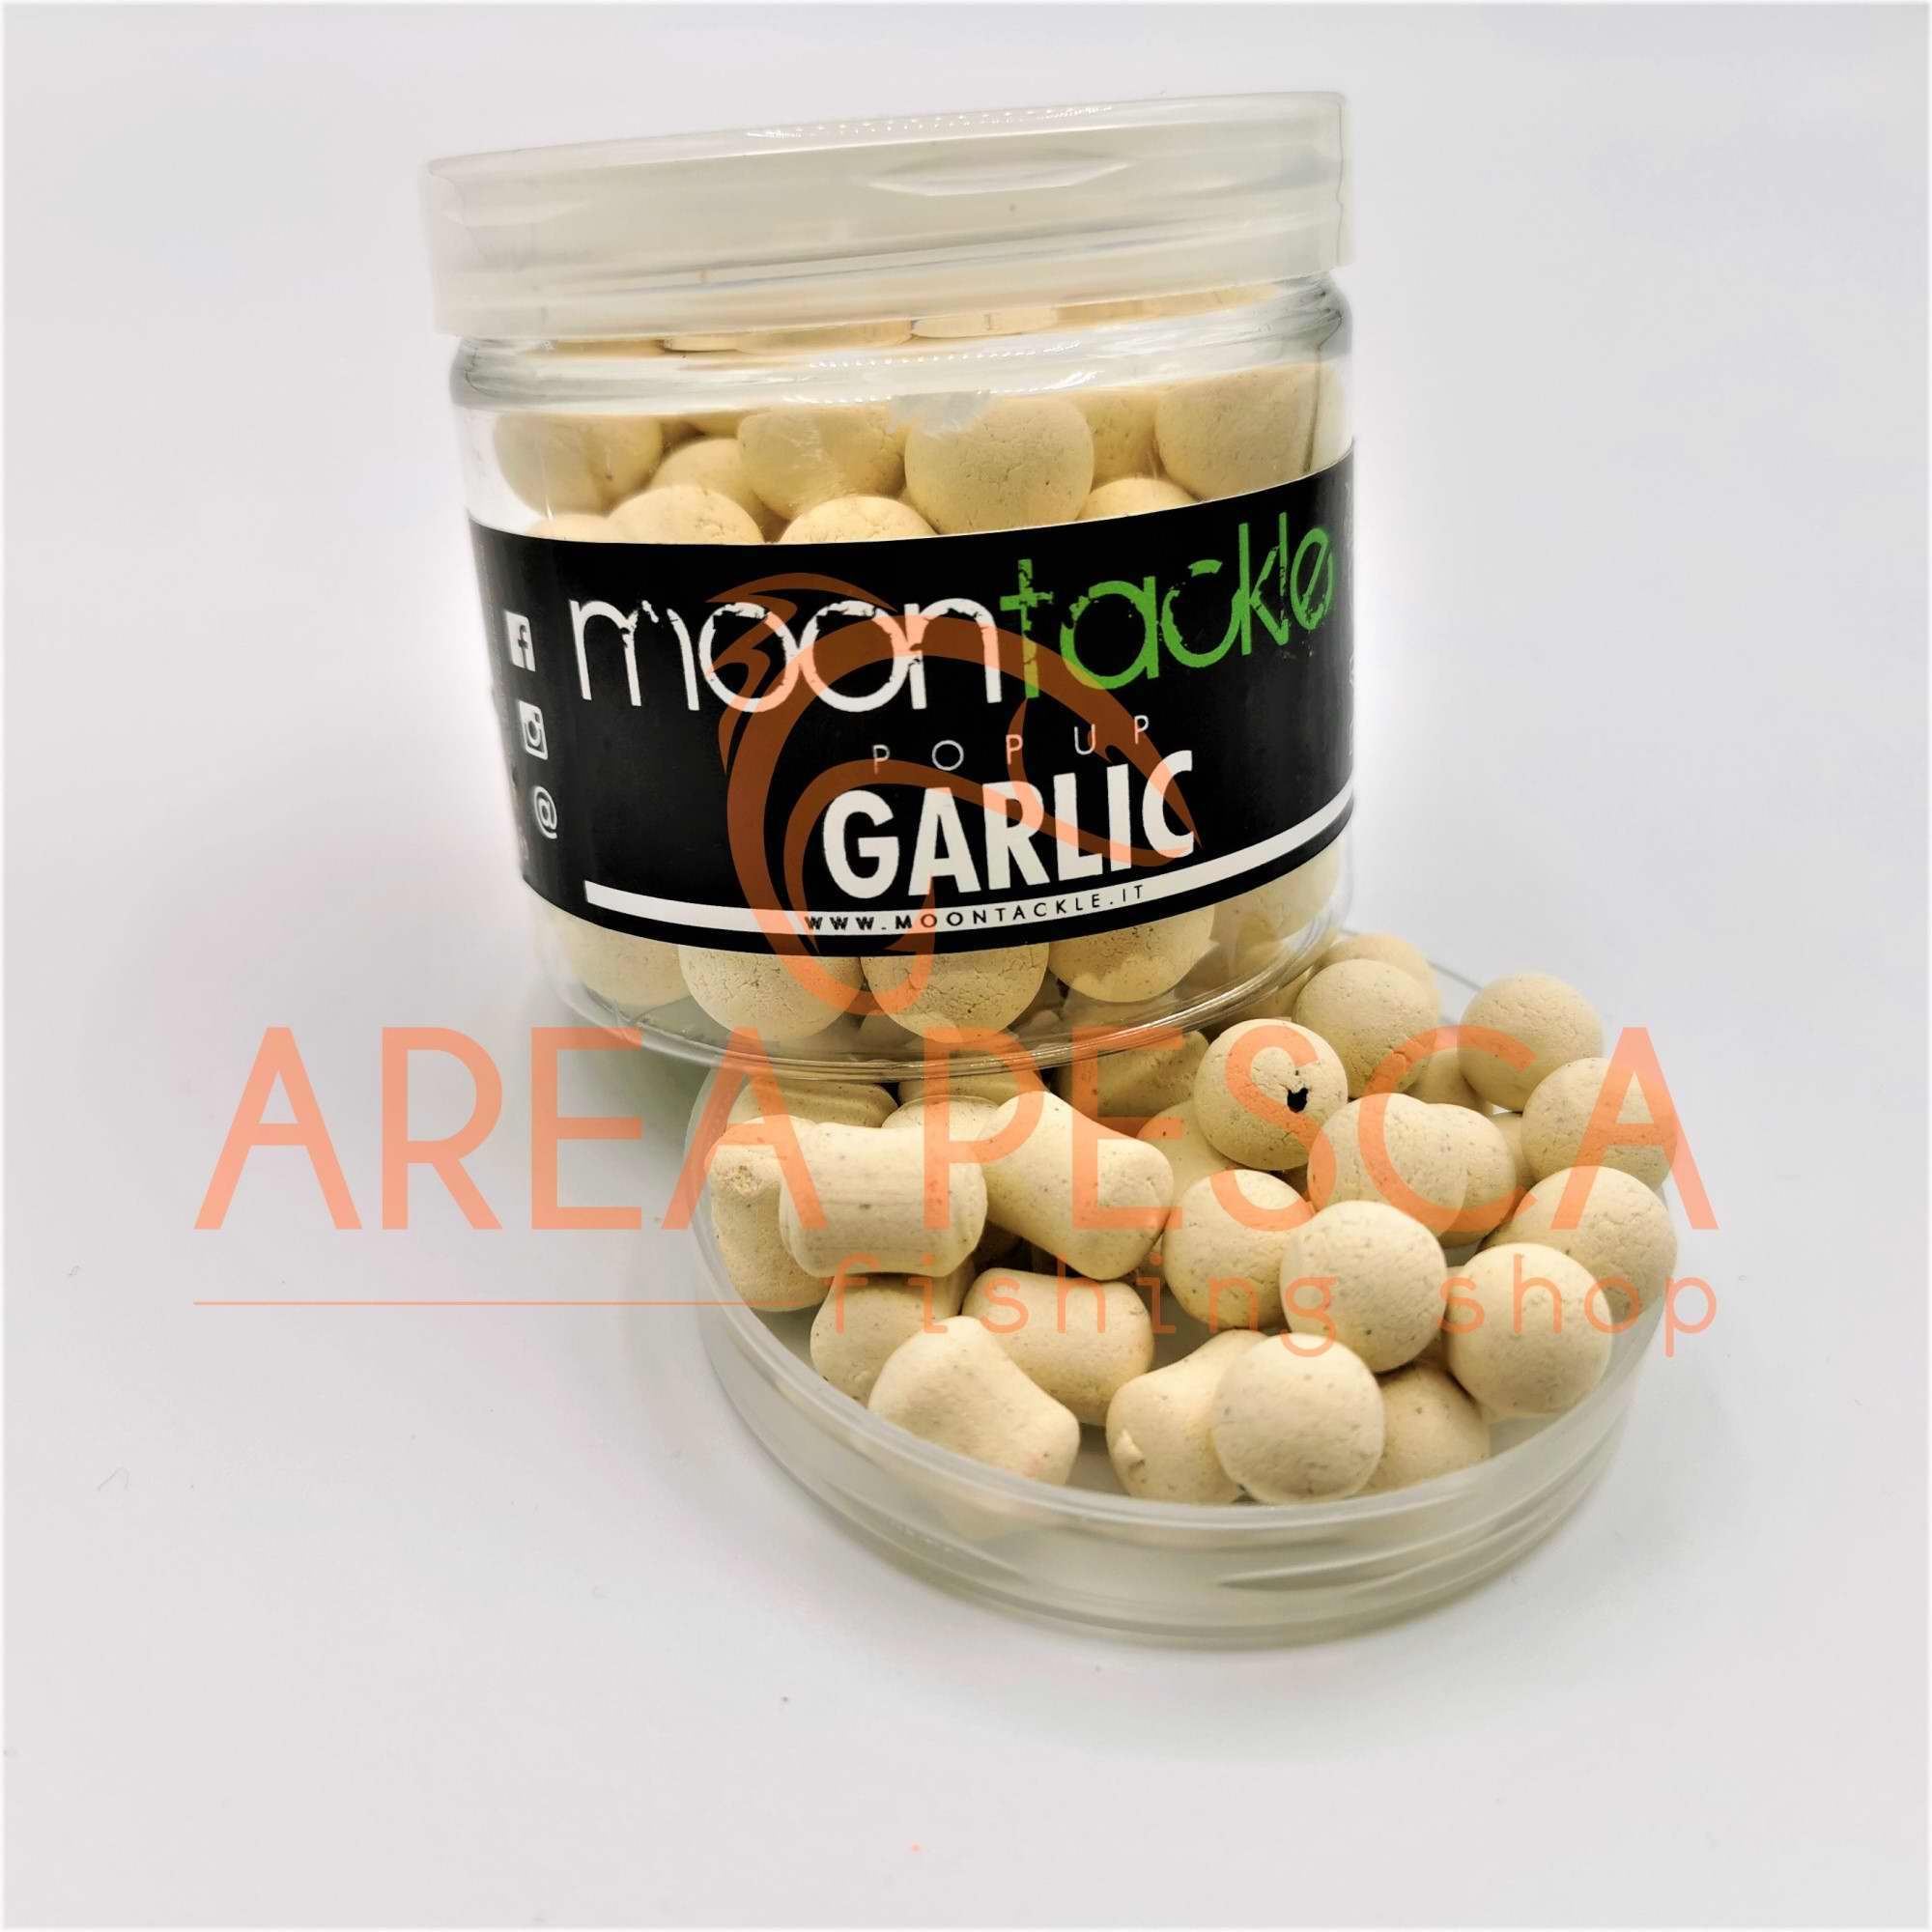 OUT/OUT_ARTICOLI/areapesca.it_AP01346.102_garlic-pop-up-10-mm.jpg